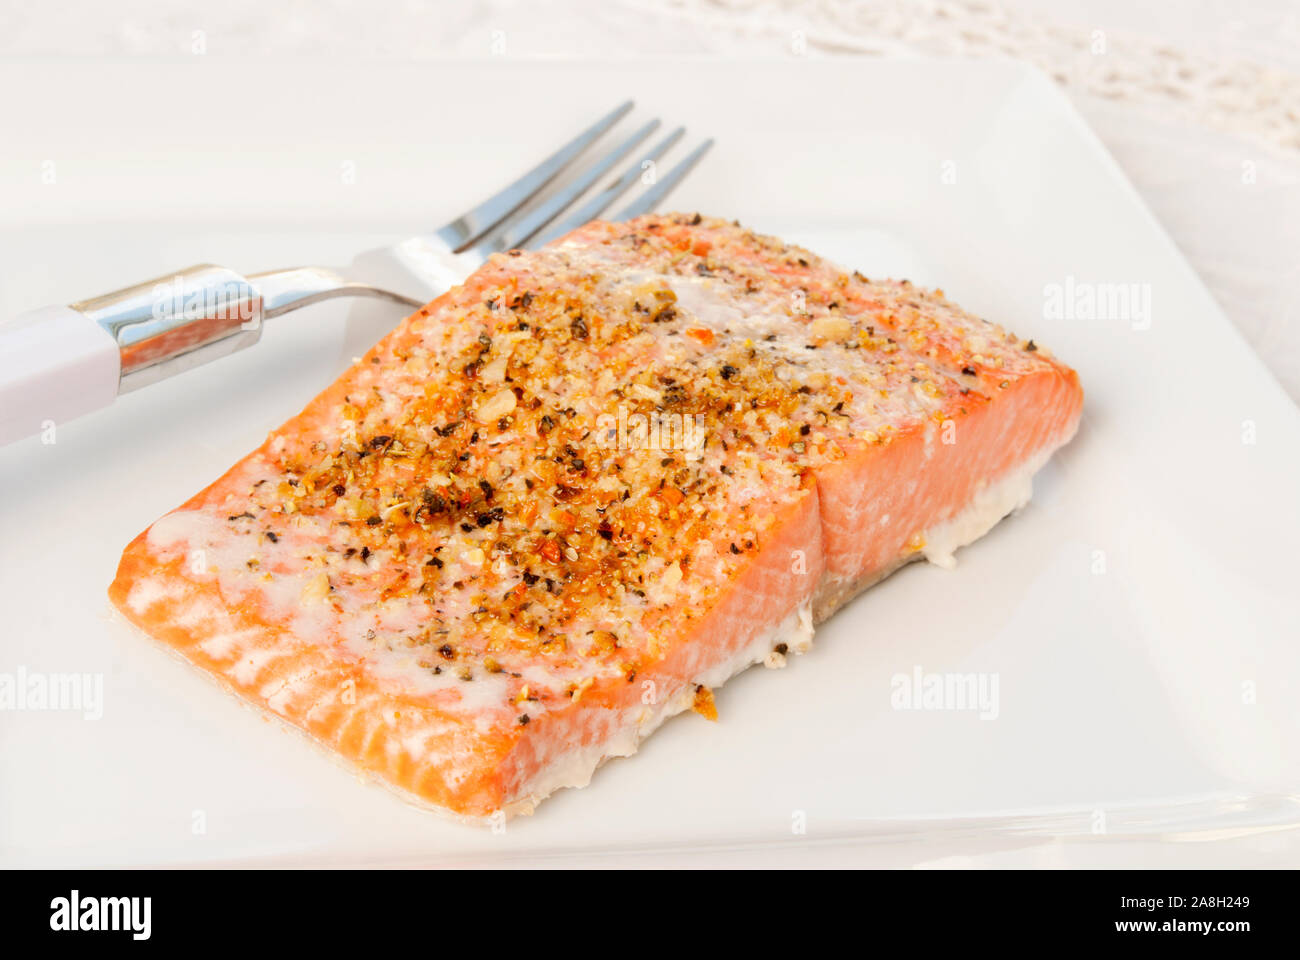 https://c8.alamy.com/comp/2A8H249/baked-alaskan-sockeye-salmon-covered-with-a-lemon-pepper-seasoning-blend-served-on-a-white-plate-selective-focus-and-shallow-dof-2A8H249.jpg